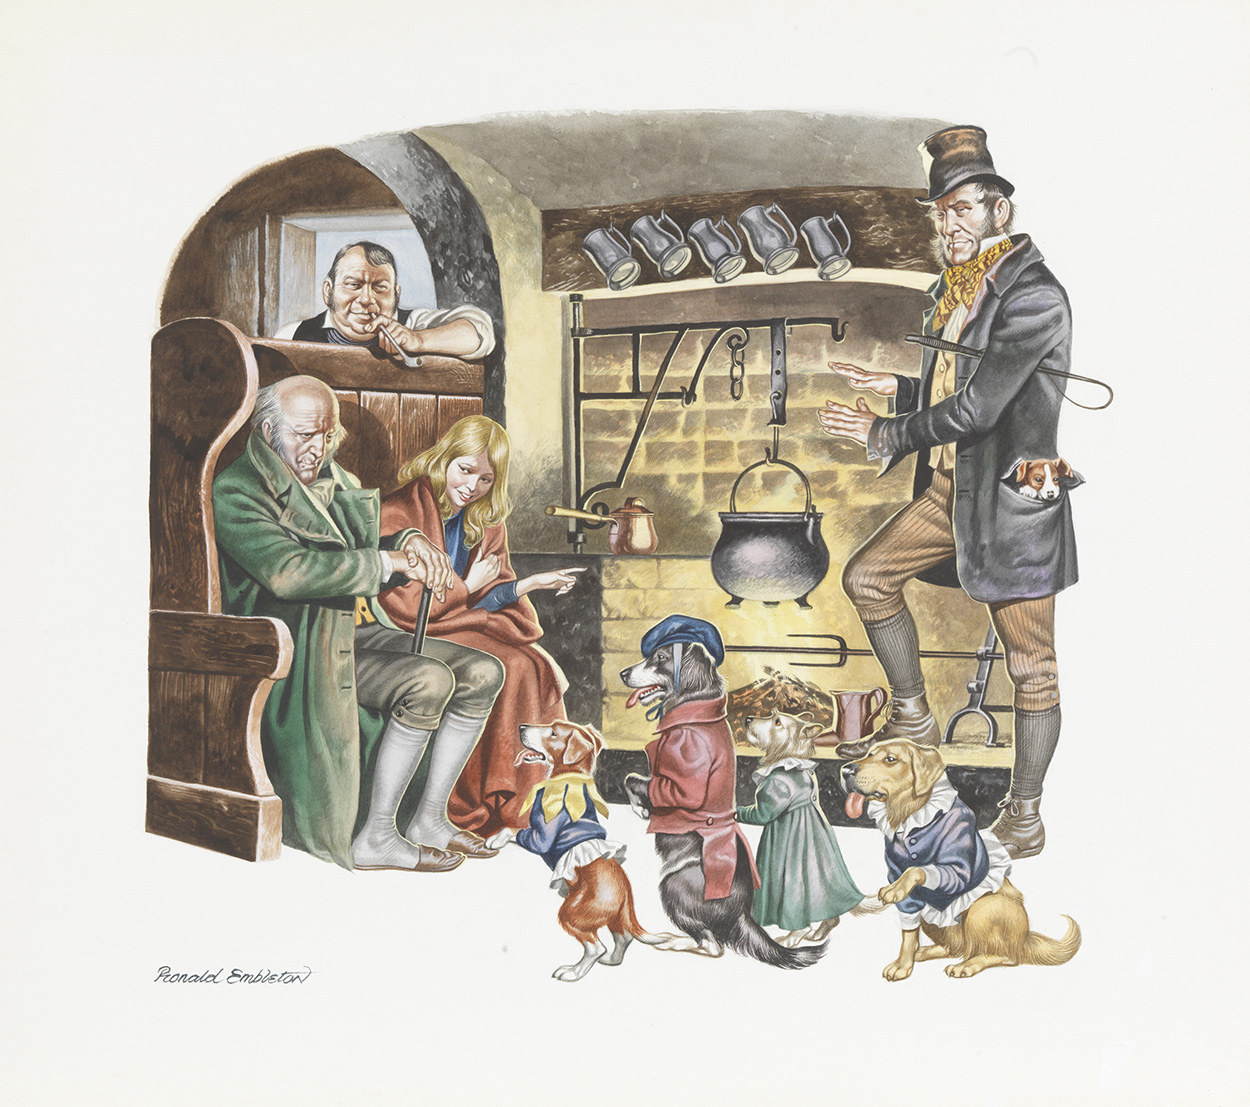 The Old Curiosity Shop: Soup and Hungry Dogs (Original) (Signed) art by Charles Dickens (Ron Embleton) at The Illustration Art Gallery